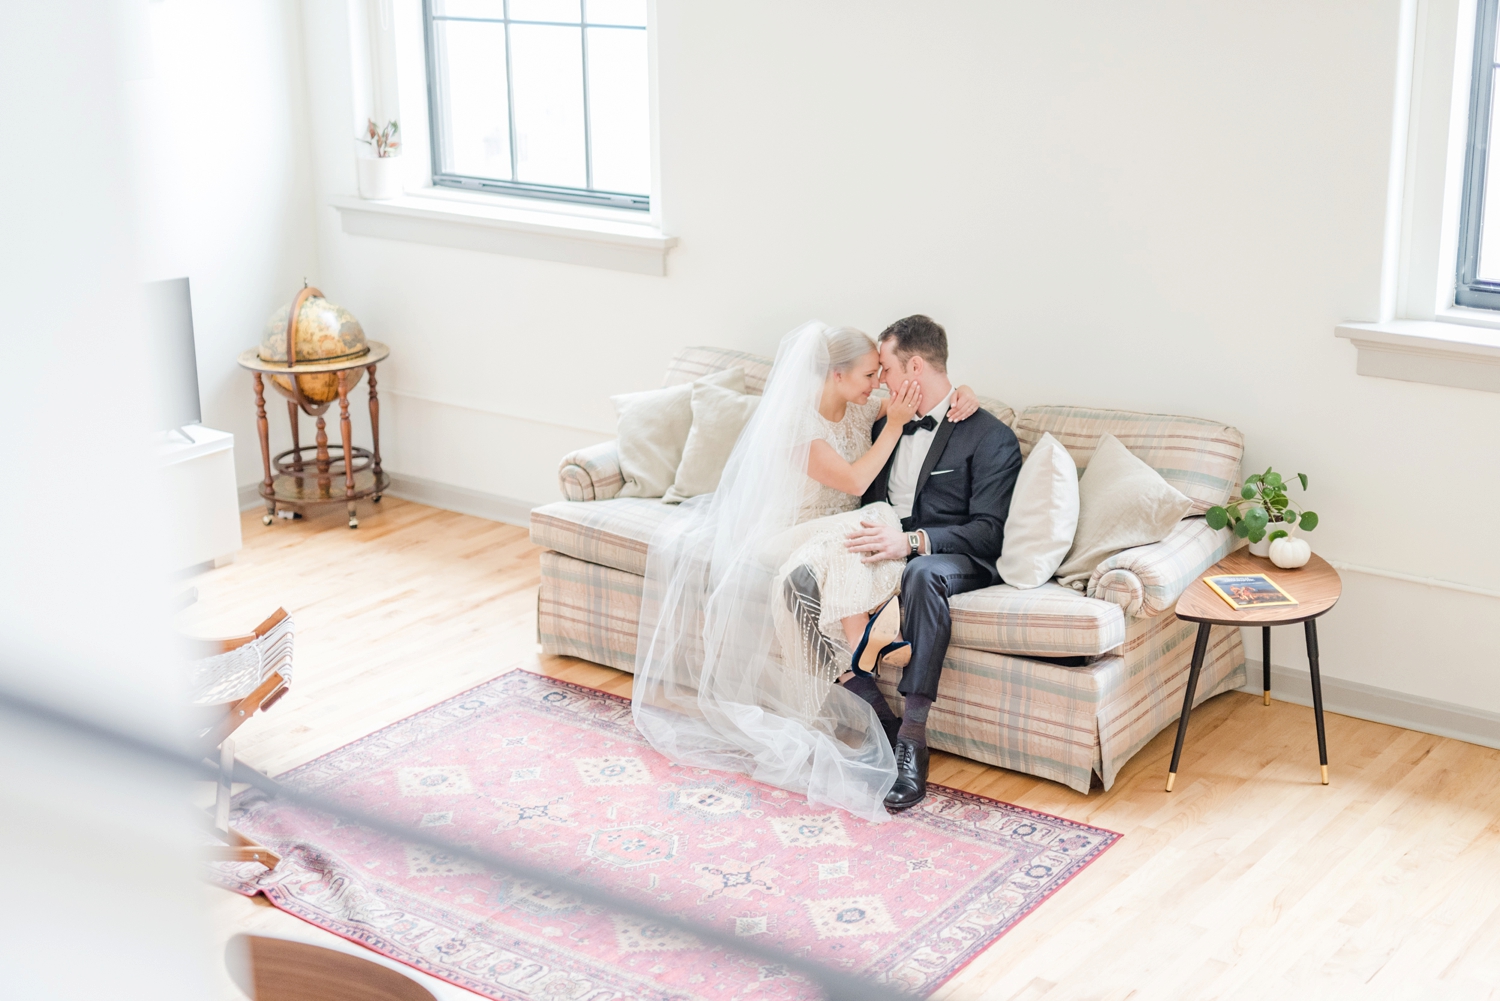 in-home-lifestyle-portraits-of-a-bride-and-groom-on-their-wedding-day